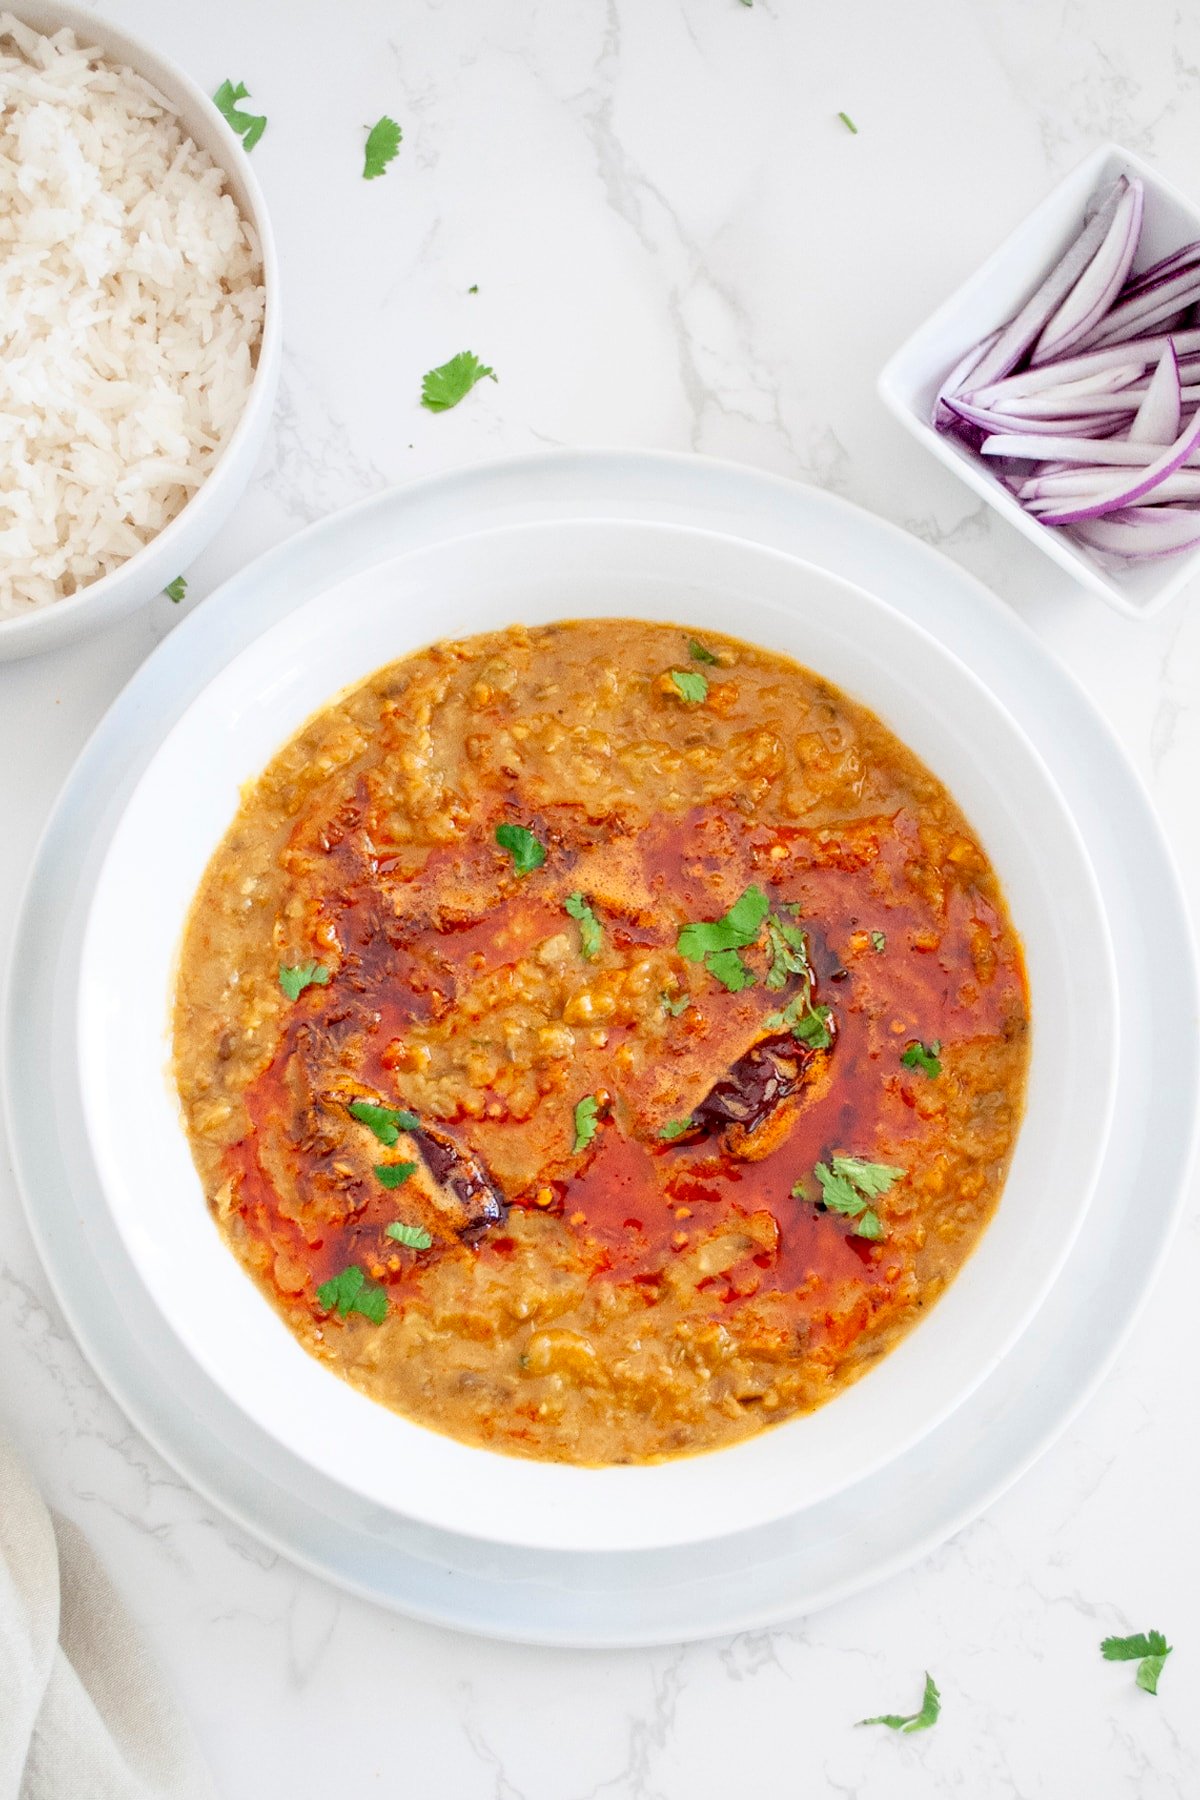 Panchmel dal with tadka on top